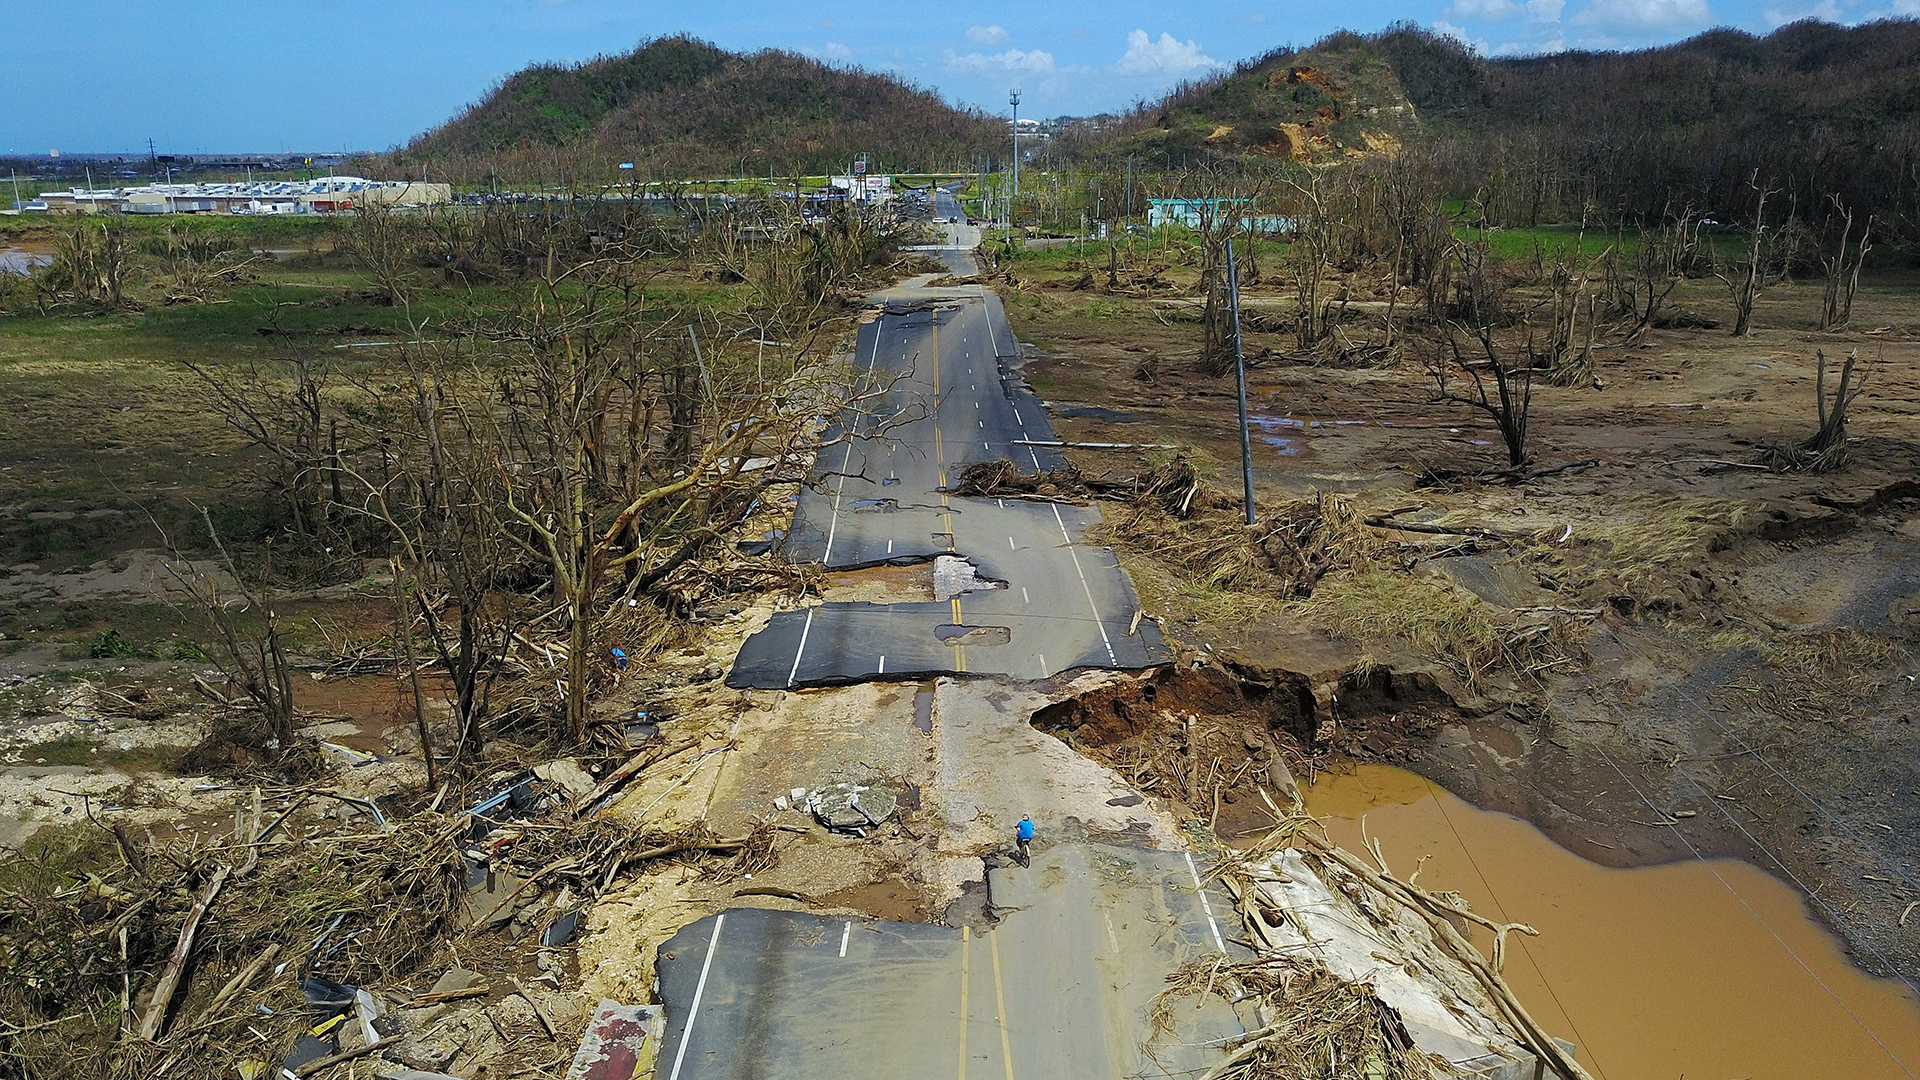 A man rides a bicycle through a damaged road in Toa Alta, west of San Juan, Puerto Rico, on Sept. 24, 2017, after the passage of Hurricane Maria.